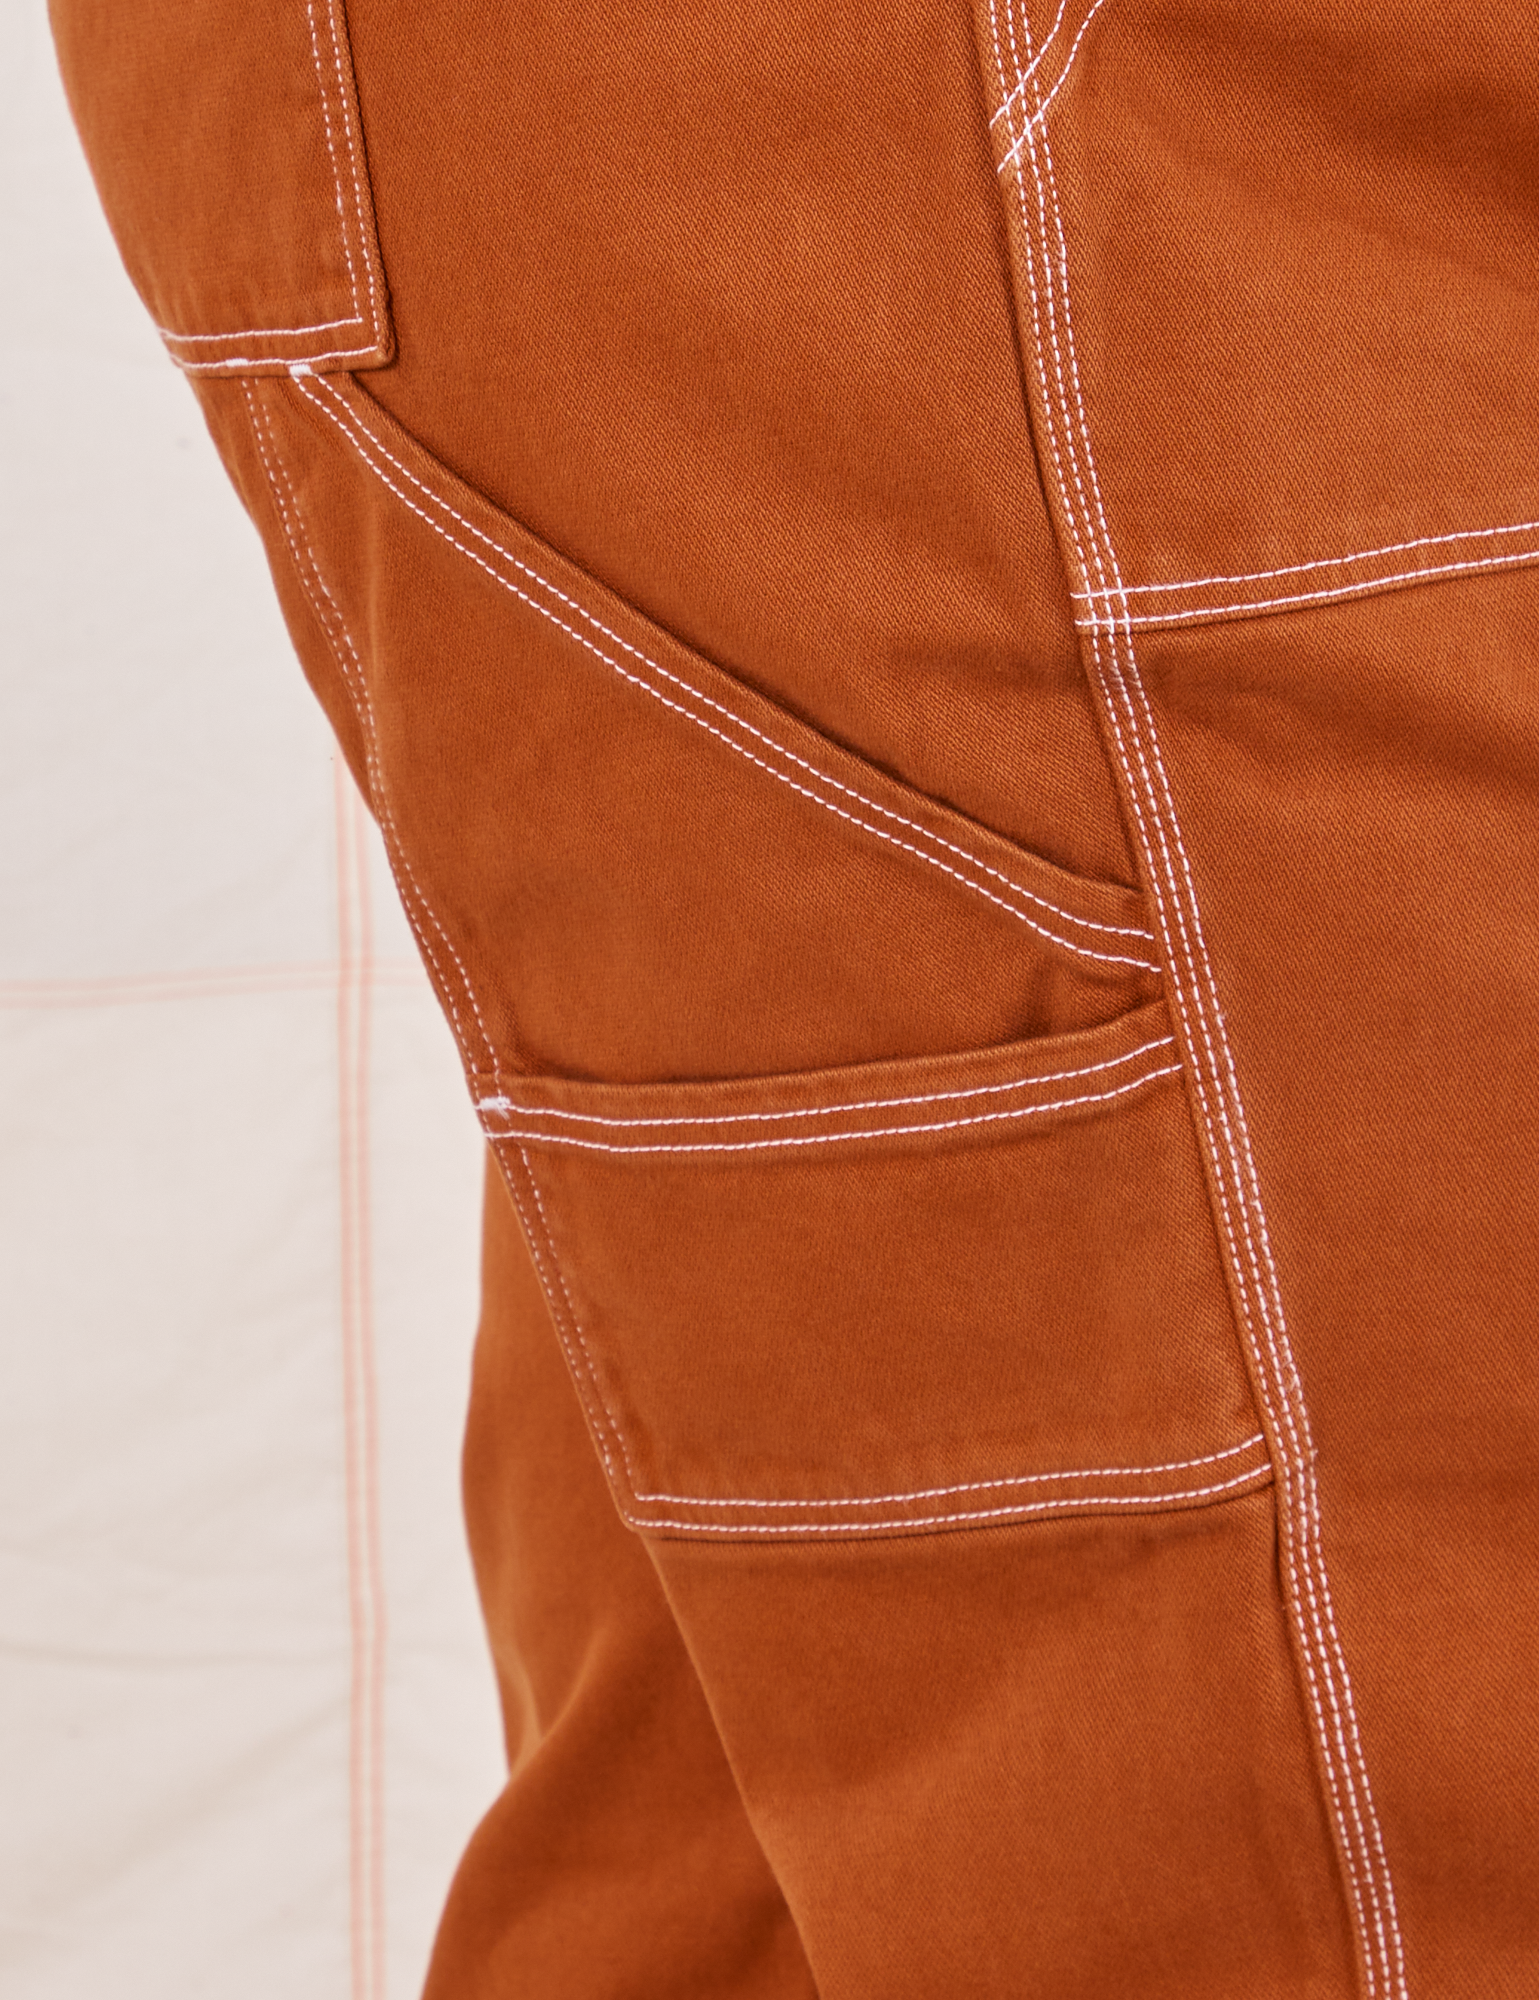 Carpenter Jeans in Burnt Terracotta close up of contrast white topstitching